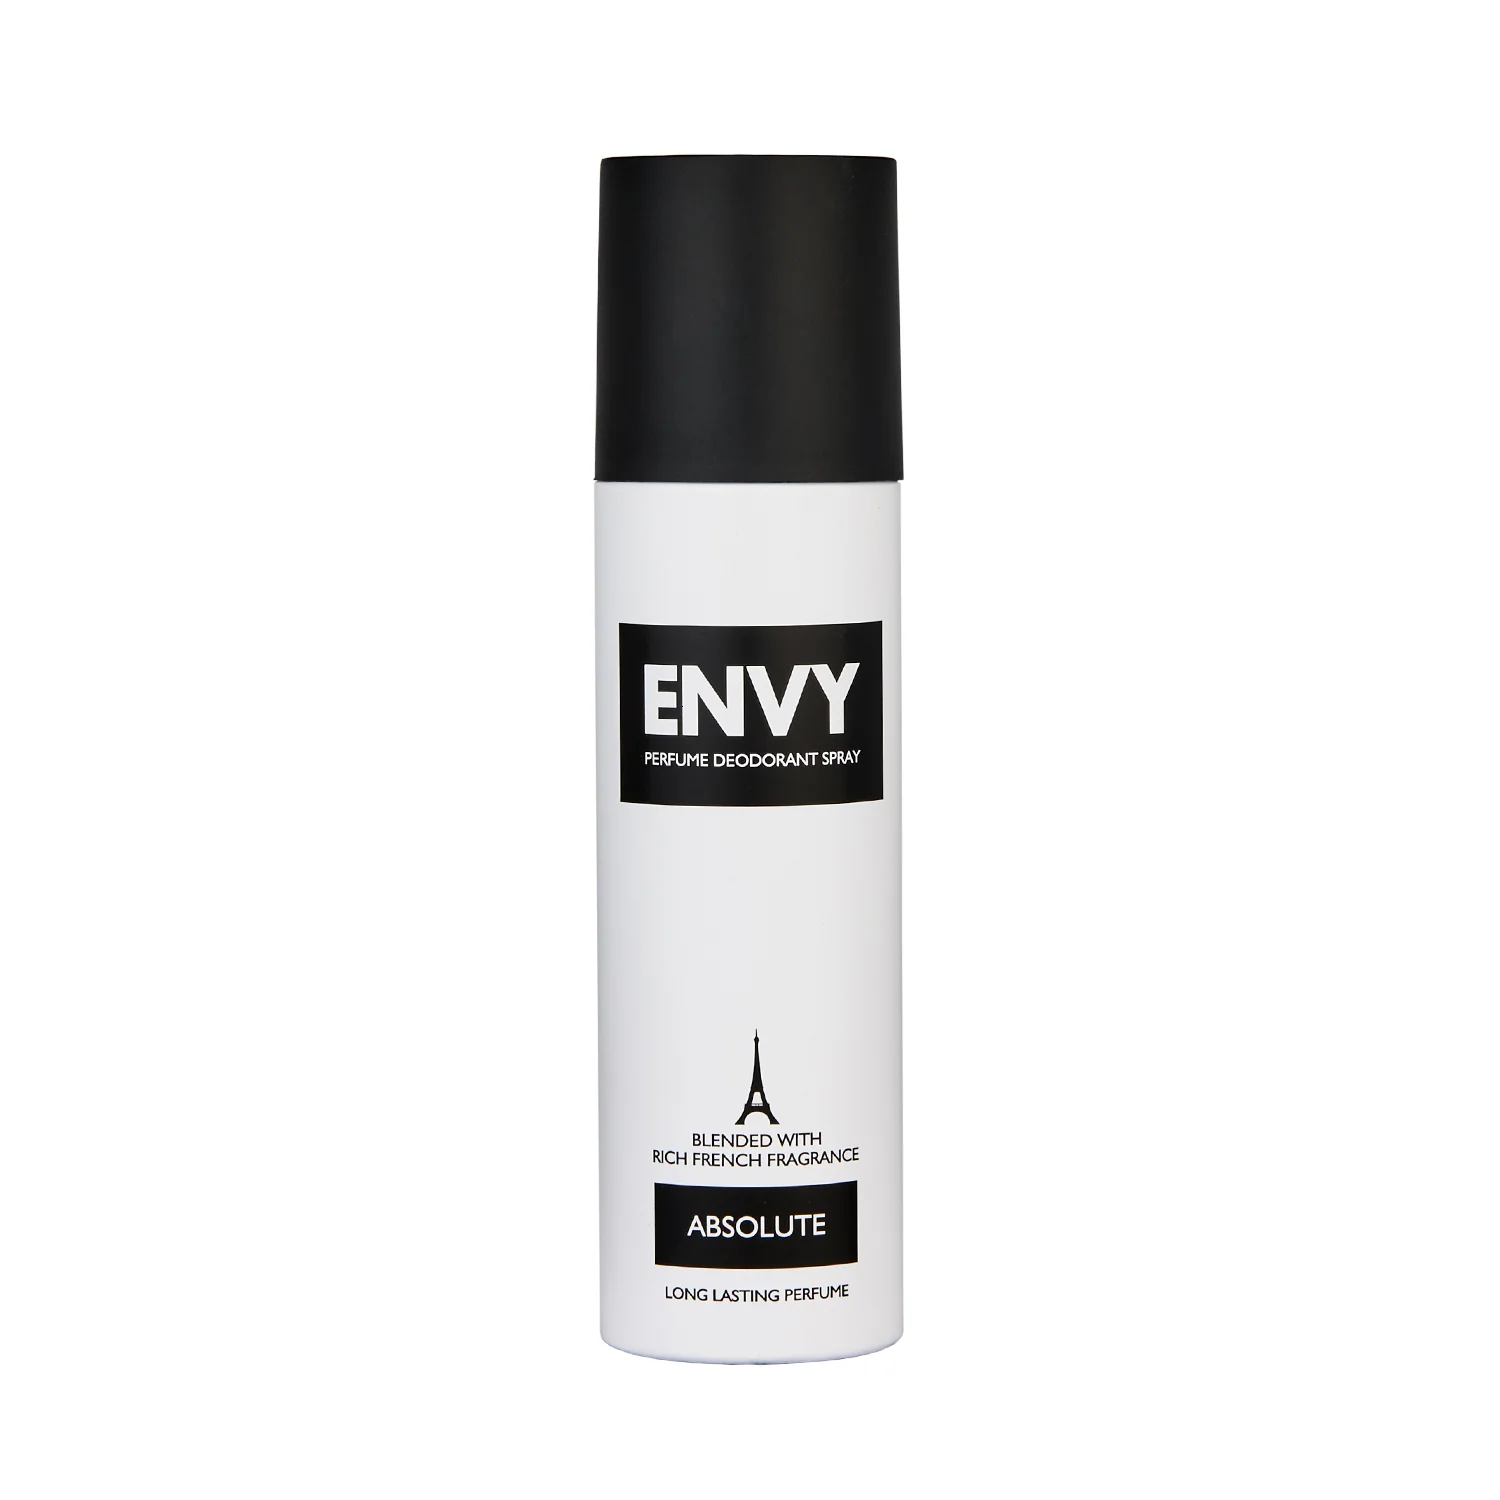 Envy Absolute deo